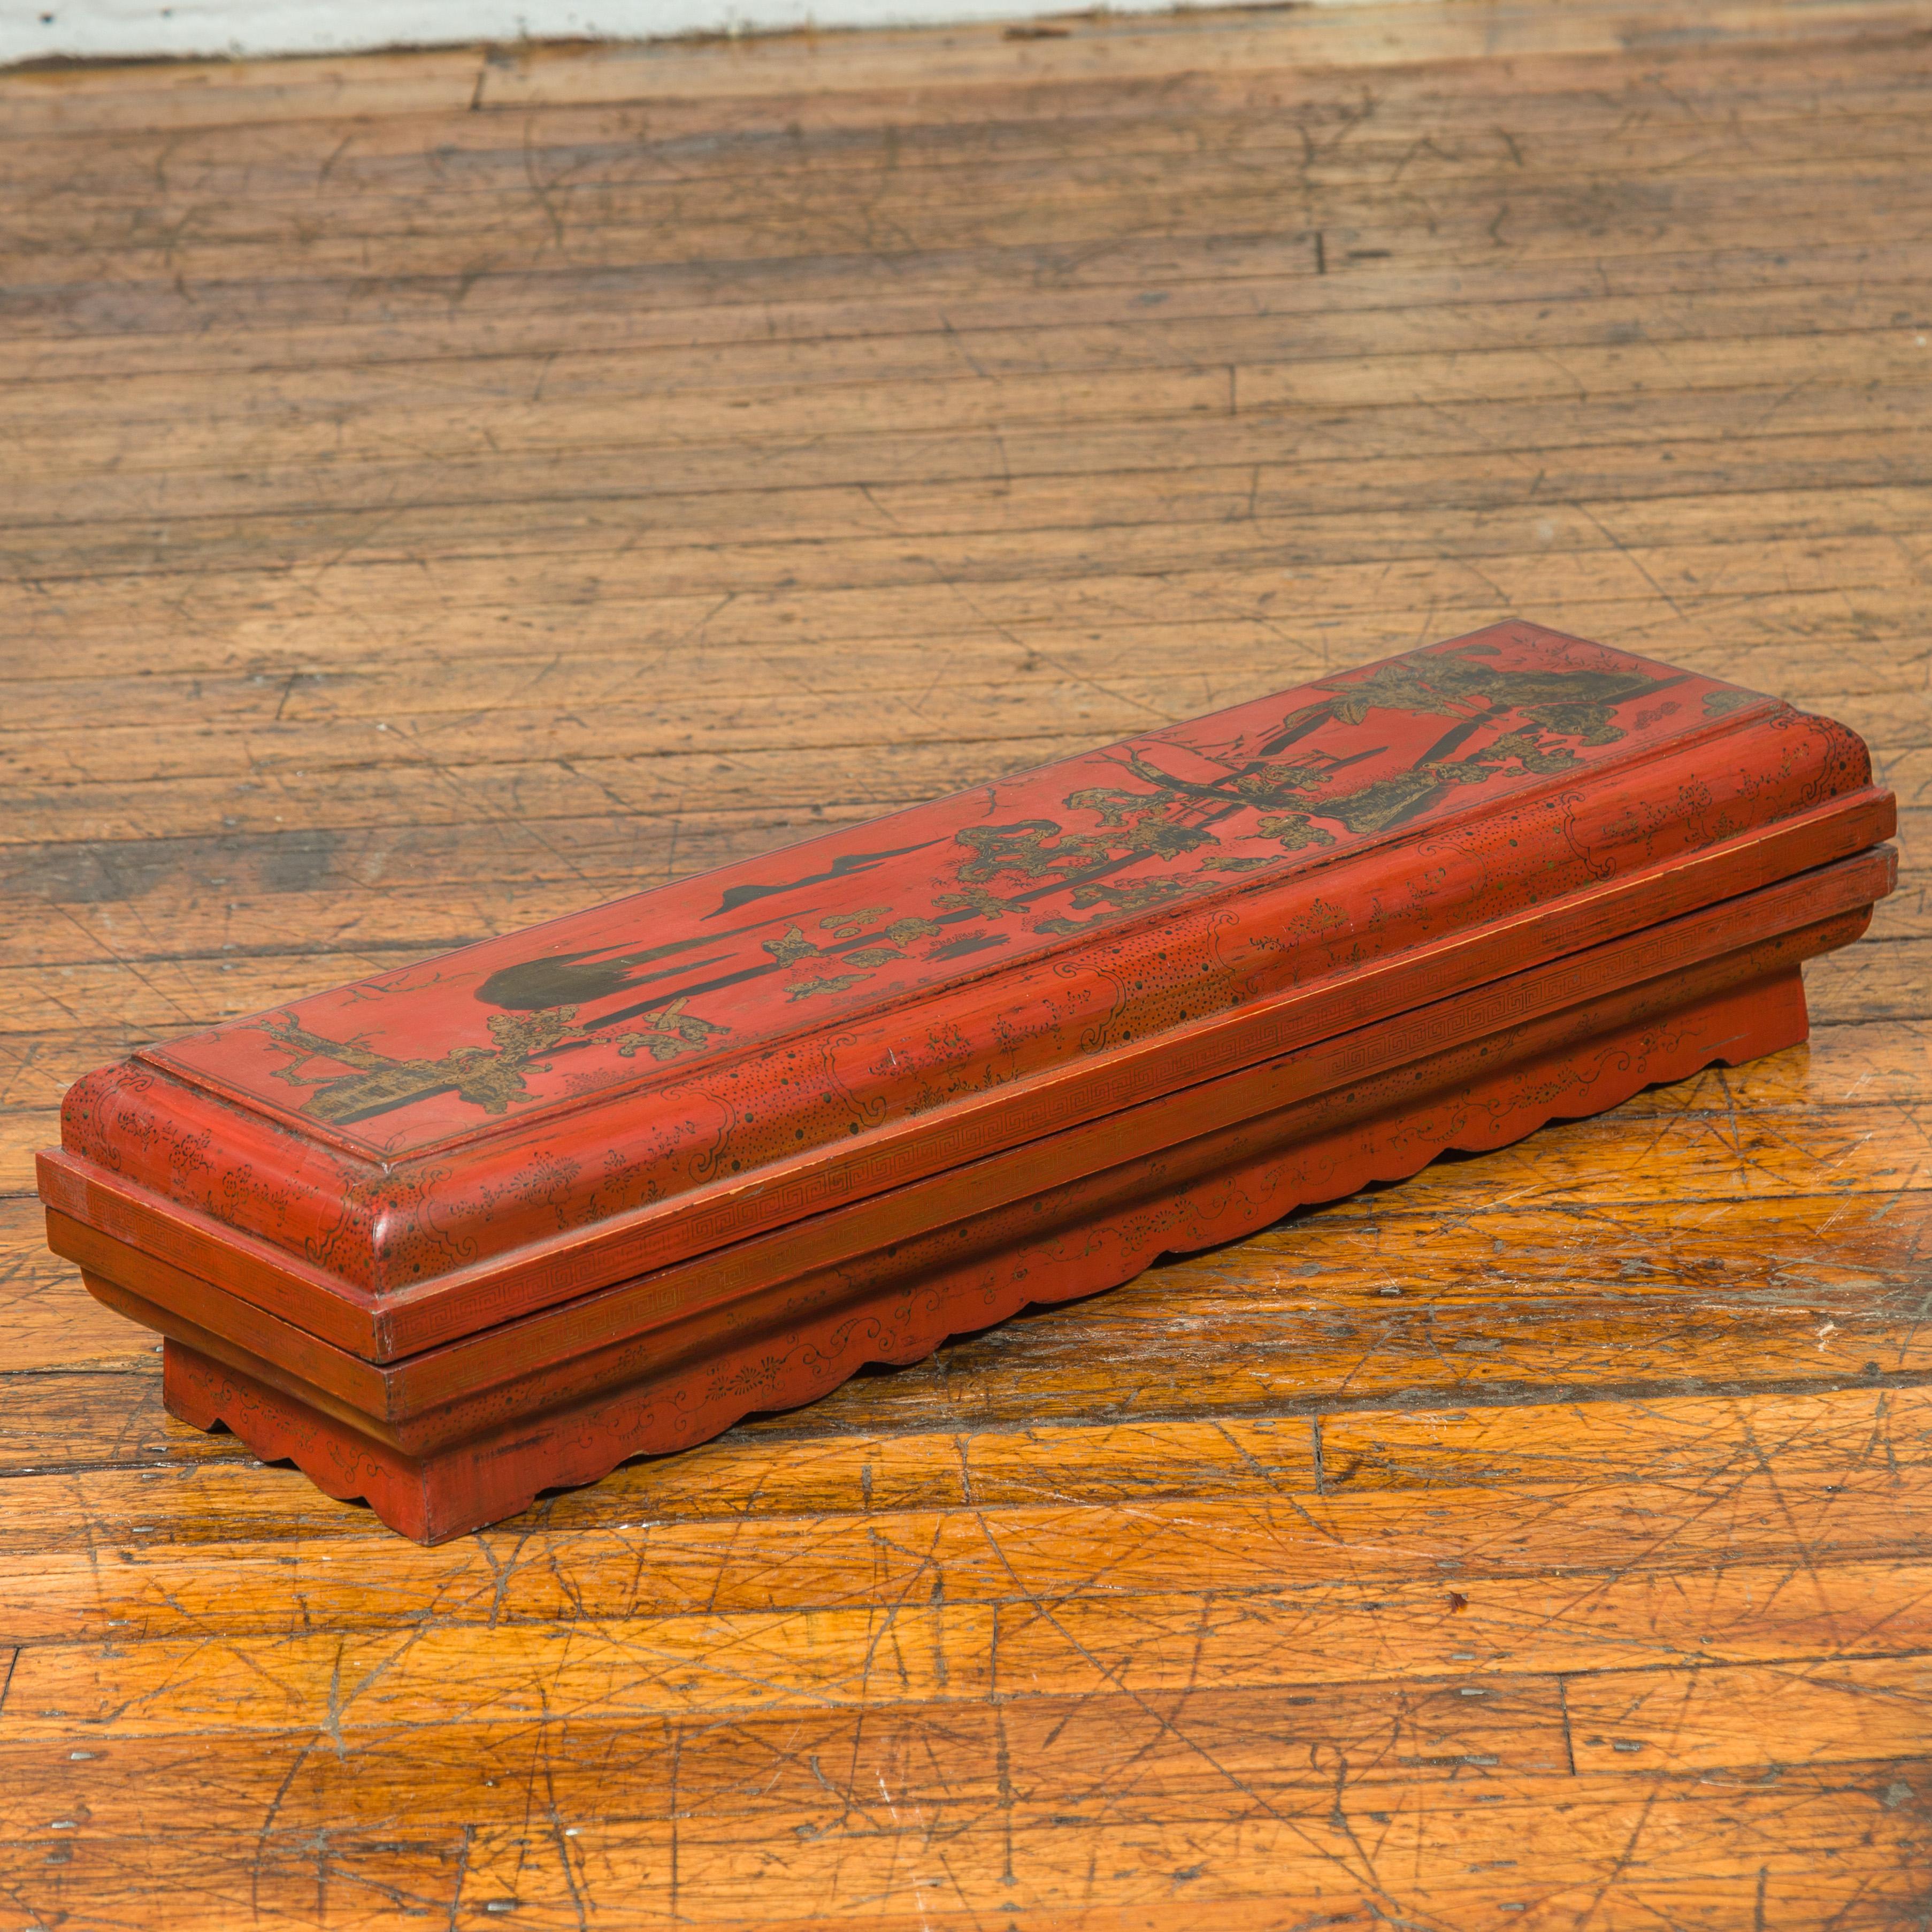 A Chinese Qing dynasty red lacquered lidded scroll box from the 19th century with distressed gold chinoiserie motifs. Resting on a scalloped plinth accented with discreet foliage, this Qing dynasty scroll box attracts our attention with its red